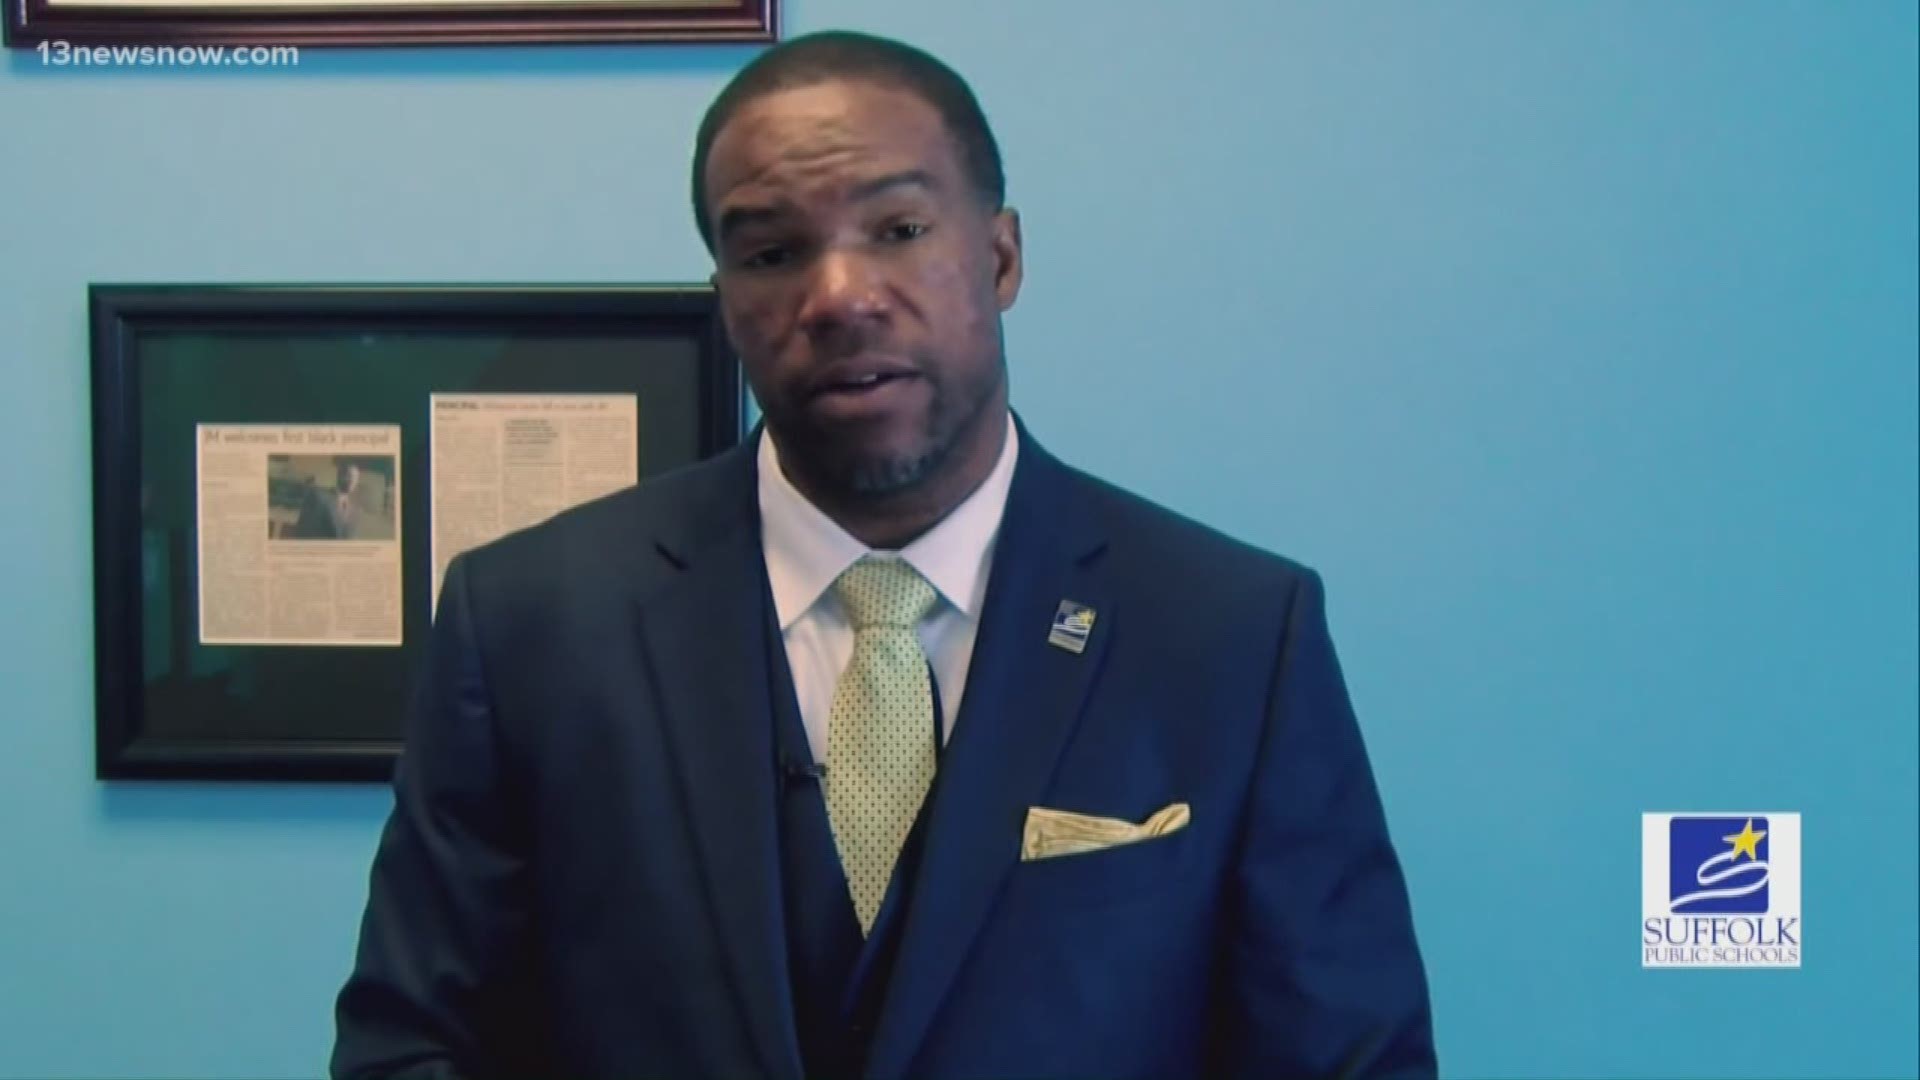 In a message to students and parents, Dr. John B. Gordon III said he plans to celebrate the district, recognize the staff, and work on closing the achievement gap.